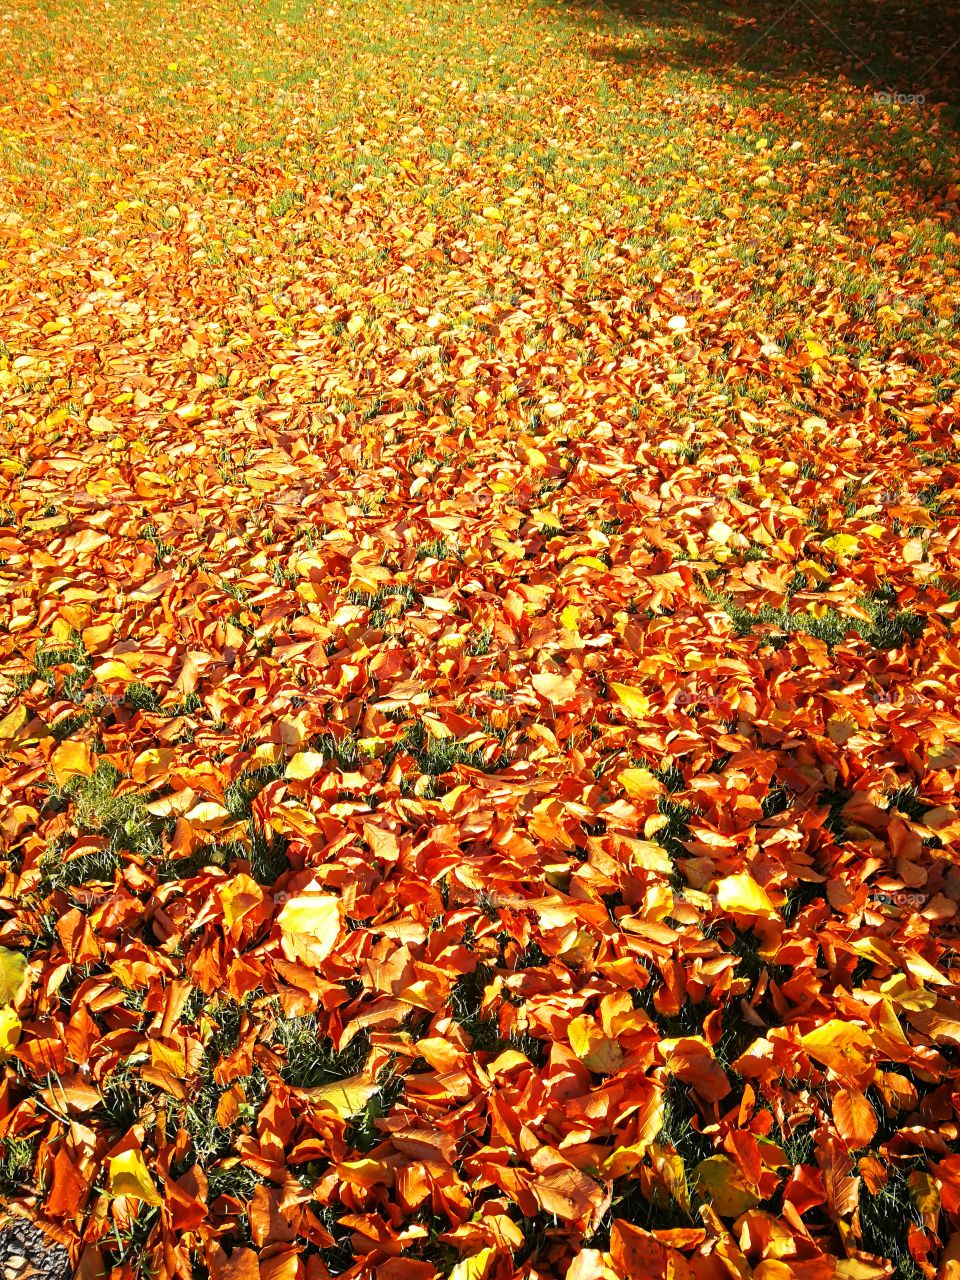 colorful fall leaves in a park untouched